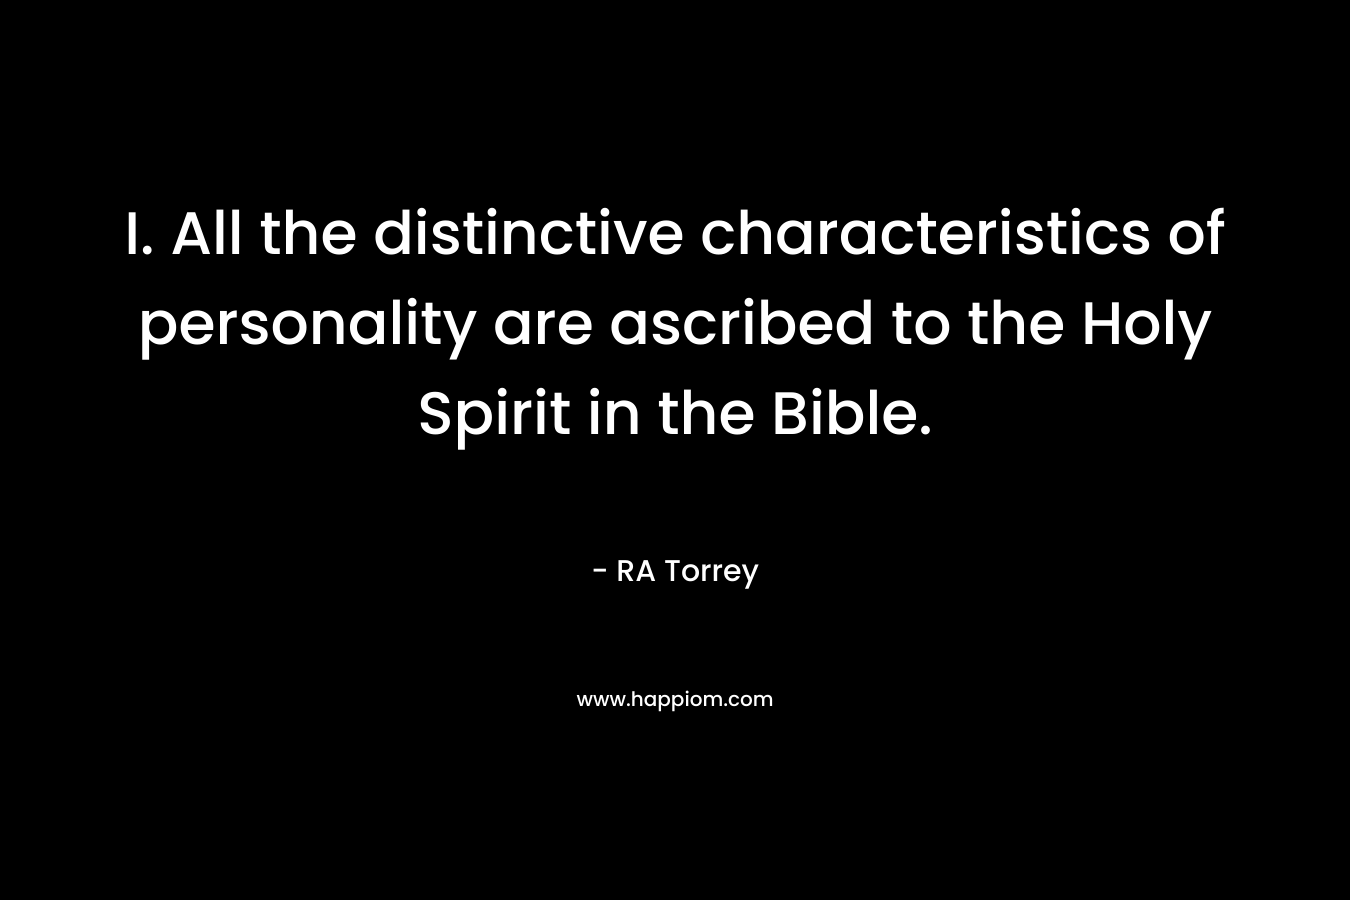 I. All the distinctive characteristics of personality are ascribed to the Holy Spirit in the Bible. – RA Torrey